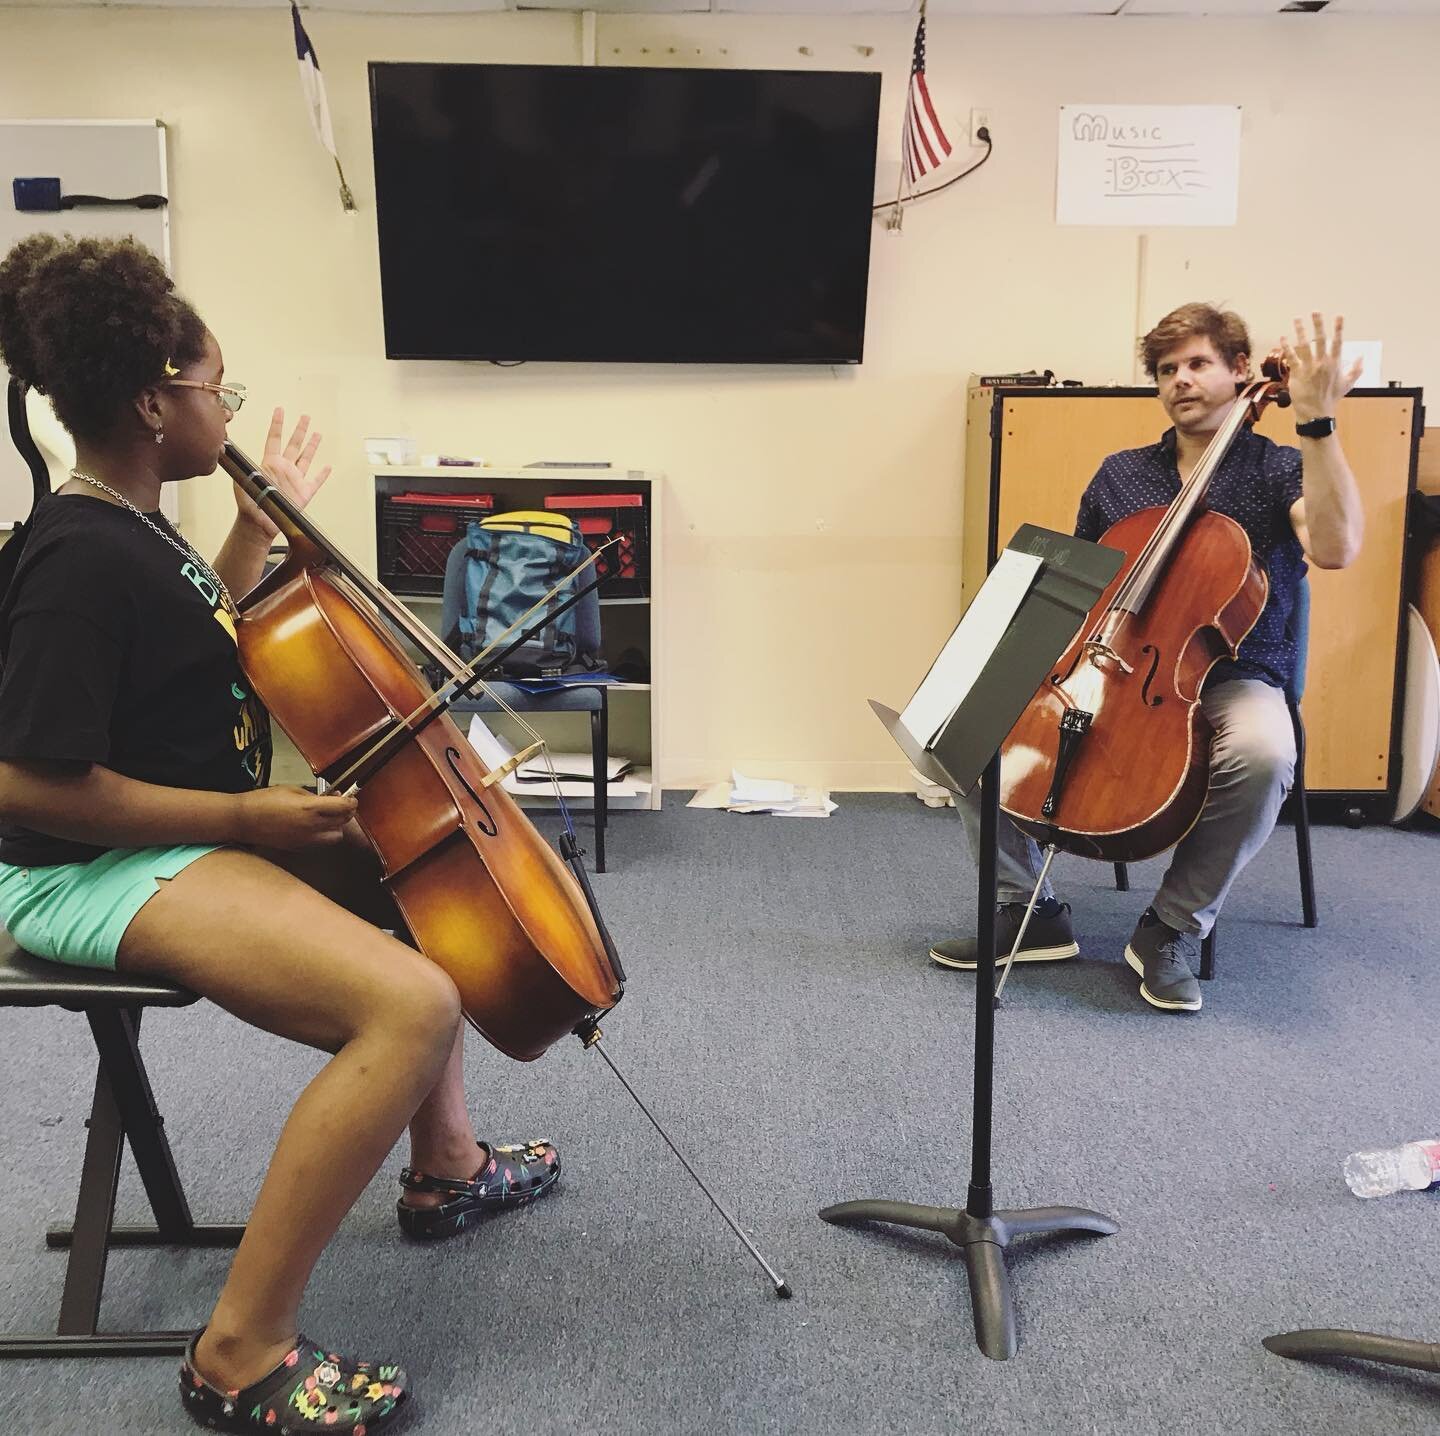 Guest artist Jake Fowler giving a wonderful cello lesson today! 🎶🎻 #cello #music #musiccamp #summercamp #neworleans